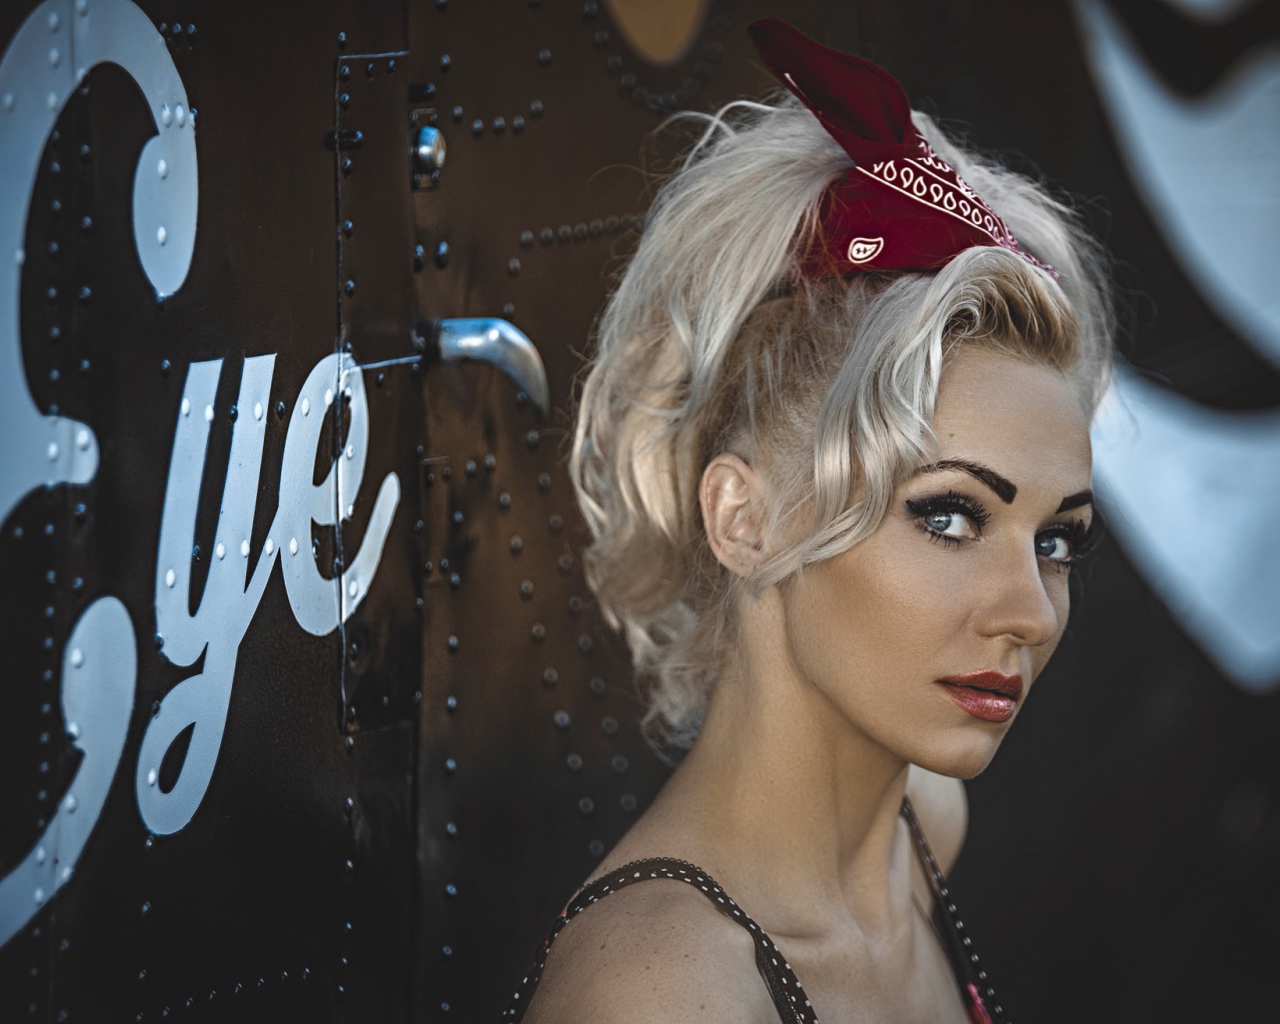 Blonde with retro hairstyle at the door of the dressing room